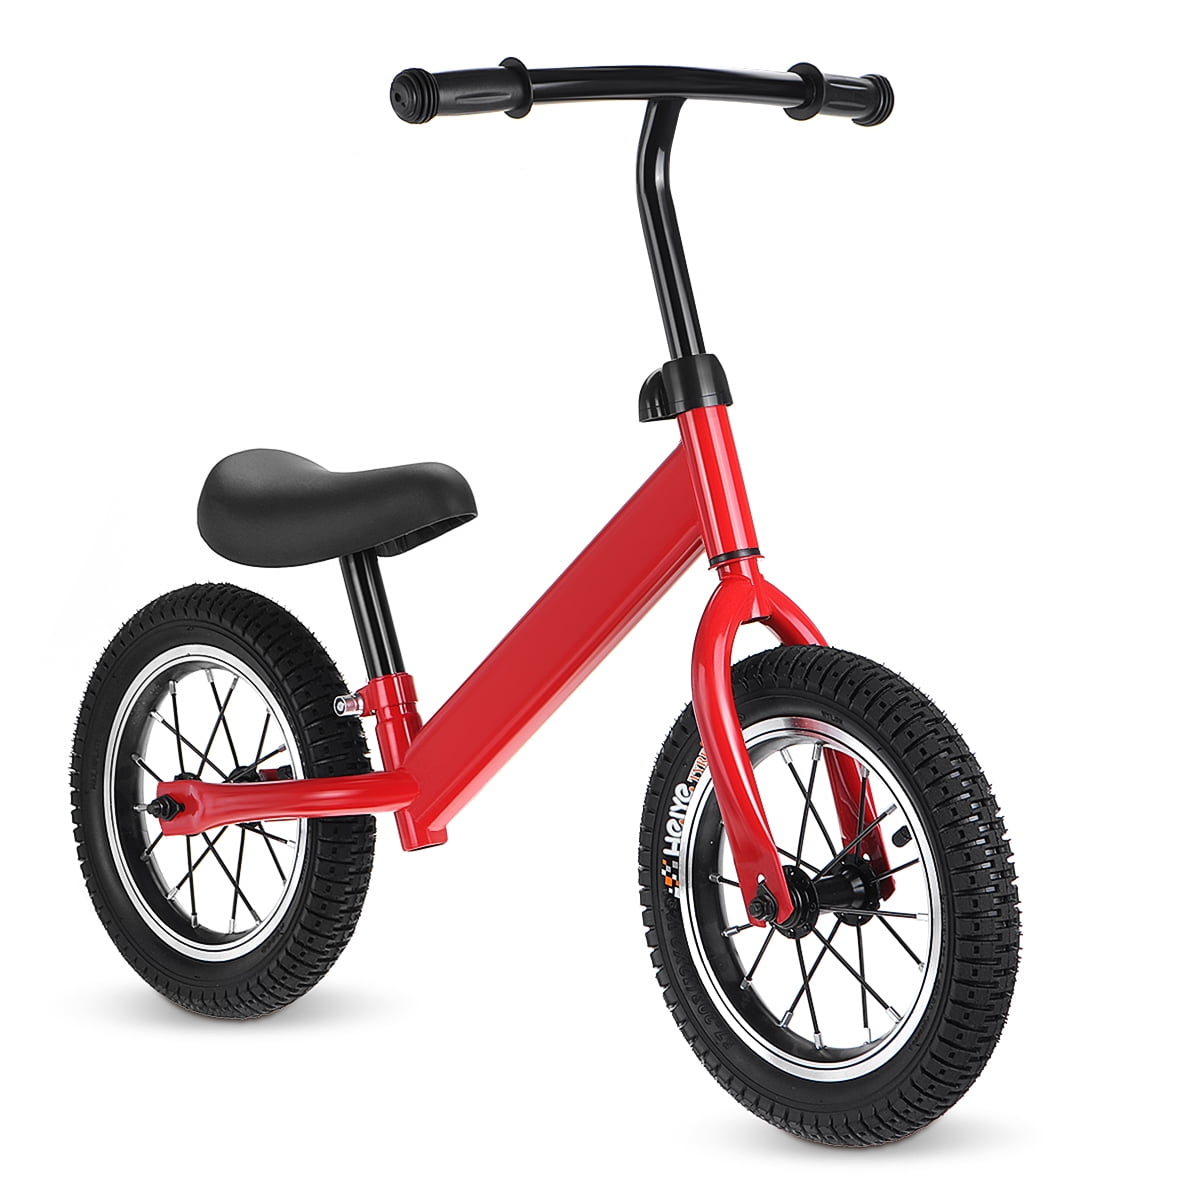 12" Children's Balance Bike No-Pedal Learn to Ride Pre Running Bicycle Kids Gift 